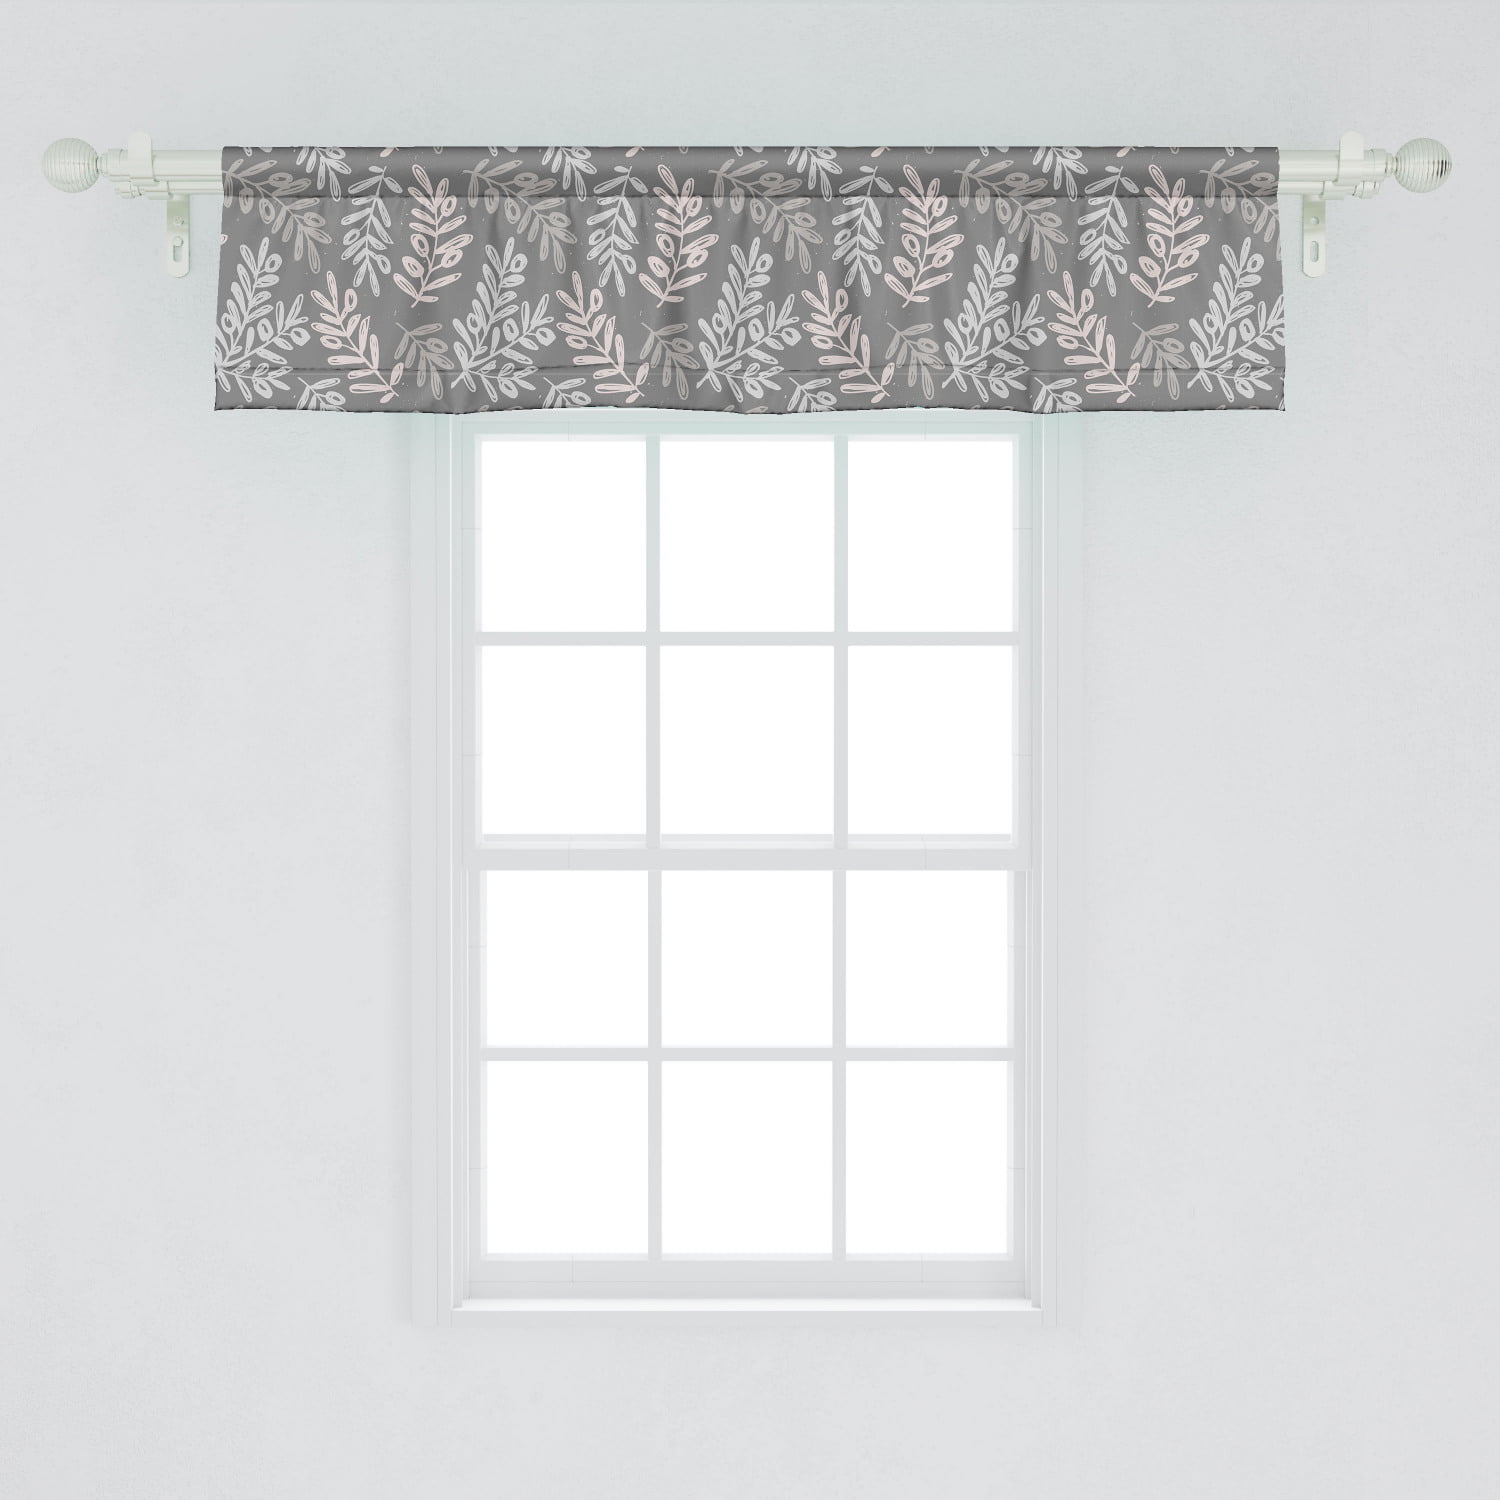 Ambesonne Forest Window Valance, Nature Eco Pattern with Winter Woodland  Deciduous Trees, Curtain Valance for Kitchen Bedroom Decor with Rod Pocket,  ...